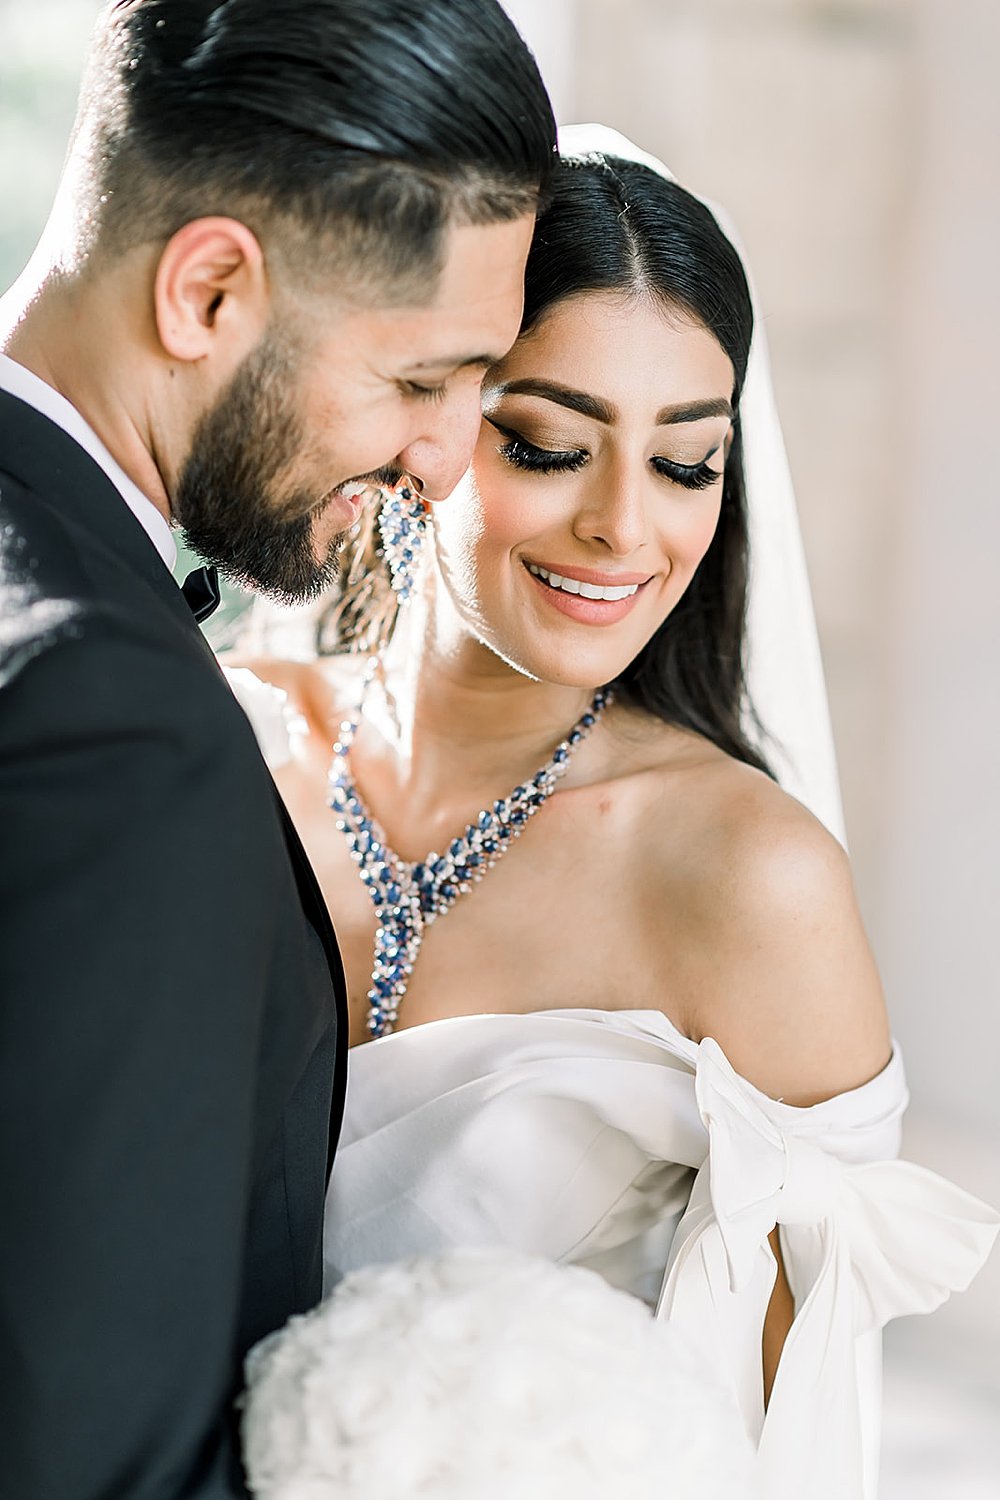 This 3-day Indian Wedding for the Venus et Fleur founders ended with a beautiful Eternity Rose filled reception at The Historic Alfred I. DuPont Building in Miami, FL